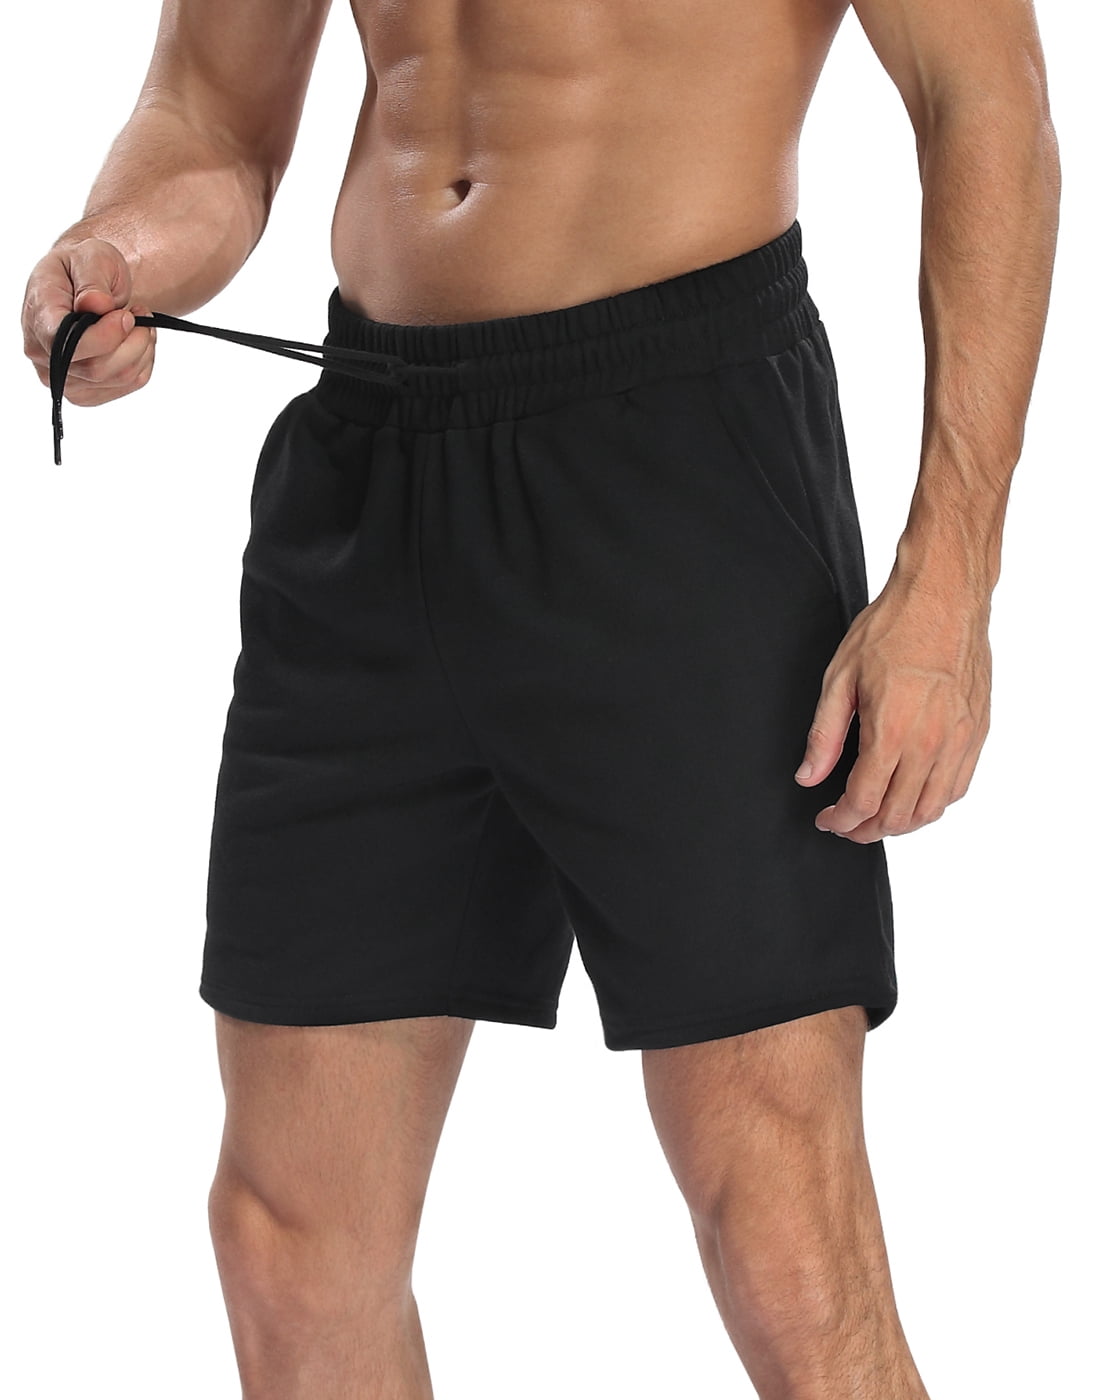 The Appeal of 7 Inch Inseam Shorts: A Closer Look